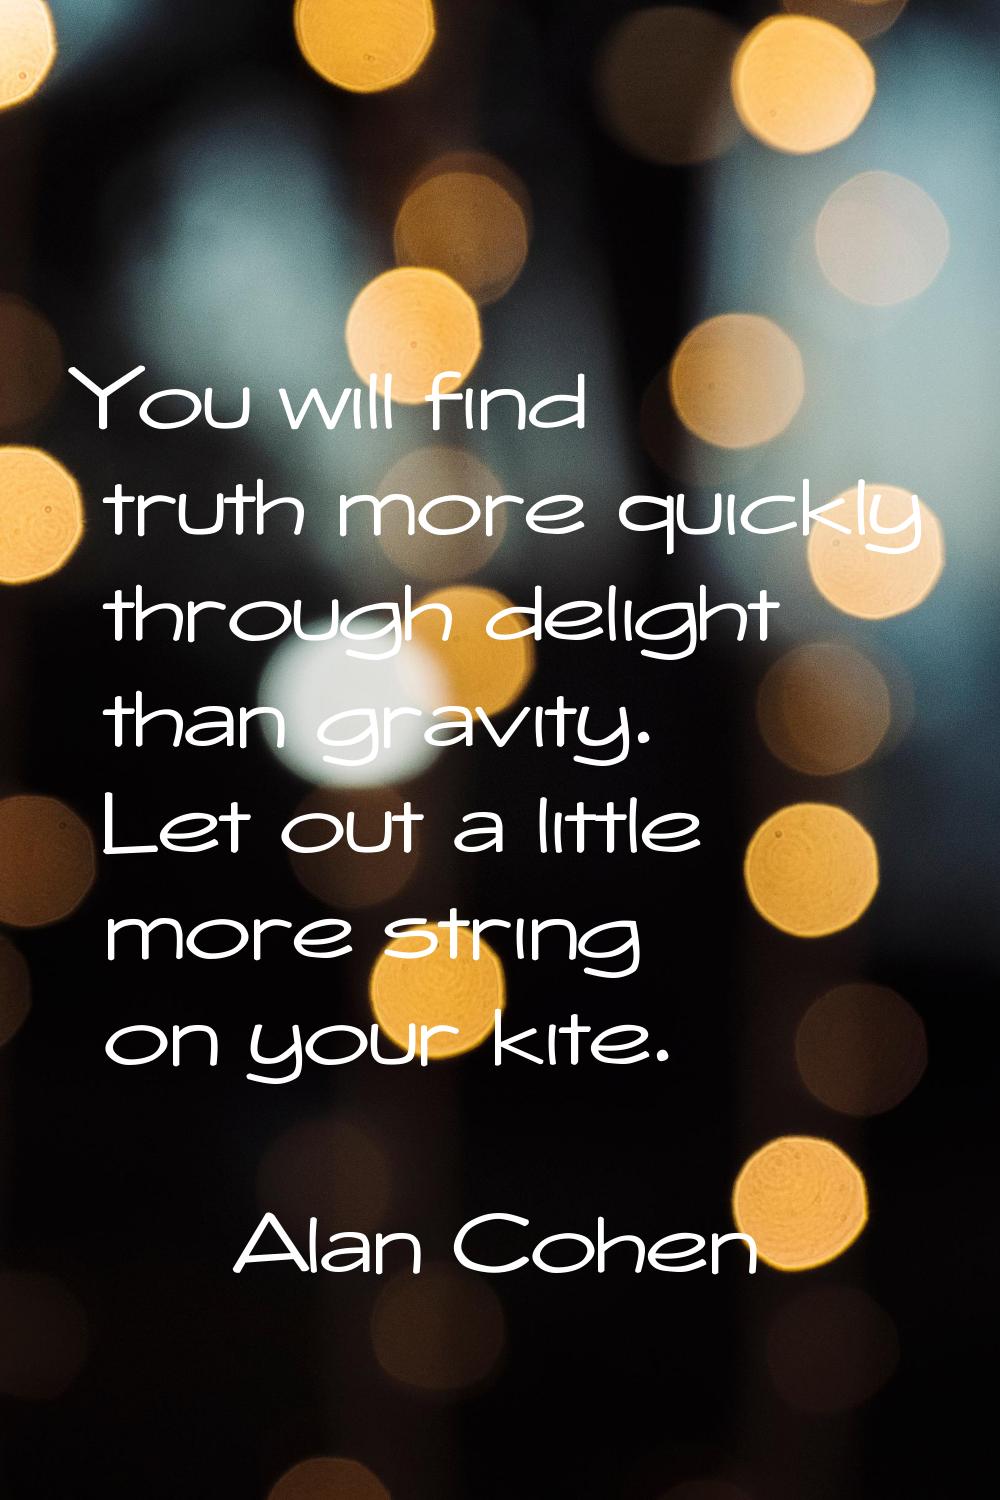 You will find truth more quickly through delight than gravity. Let out a little more string on your